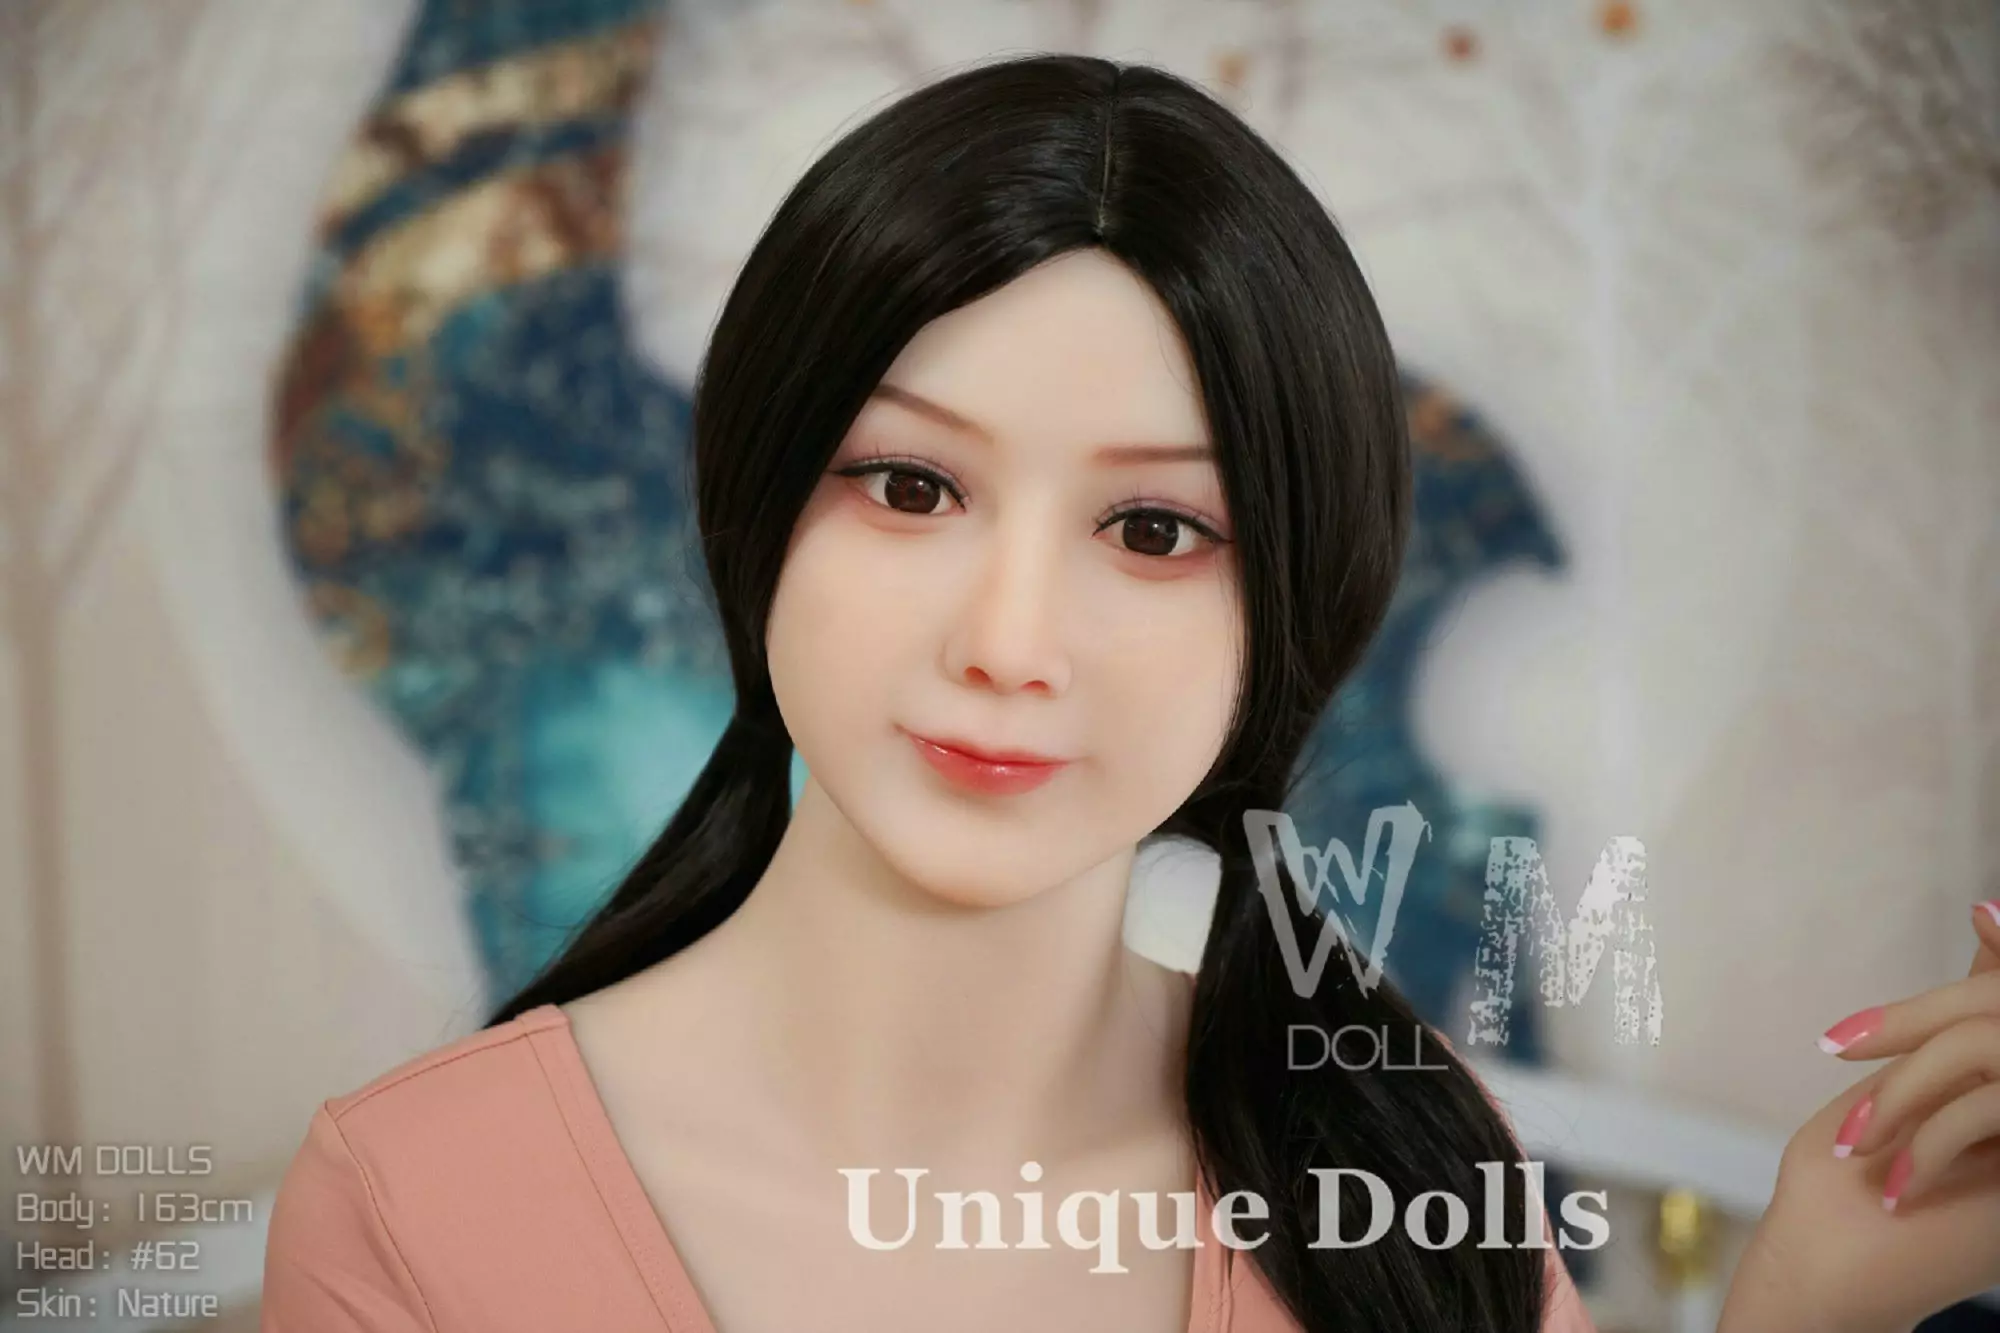 WM Doll 163cm D cup real sex doll with #62 head